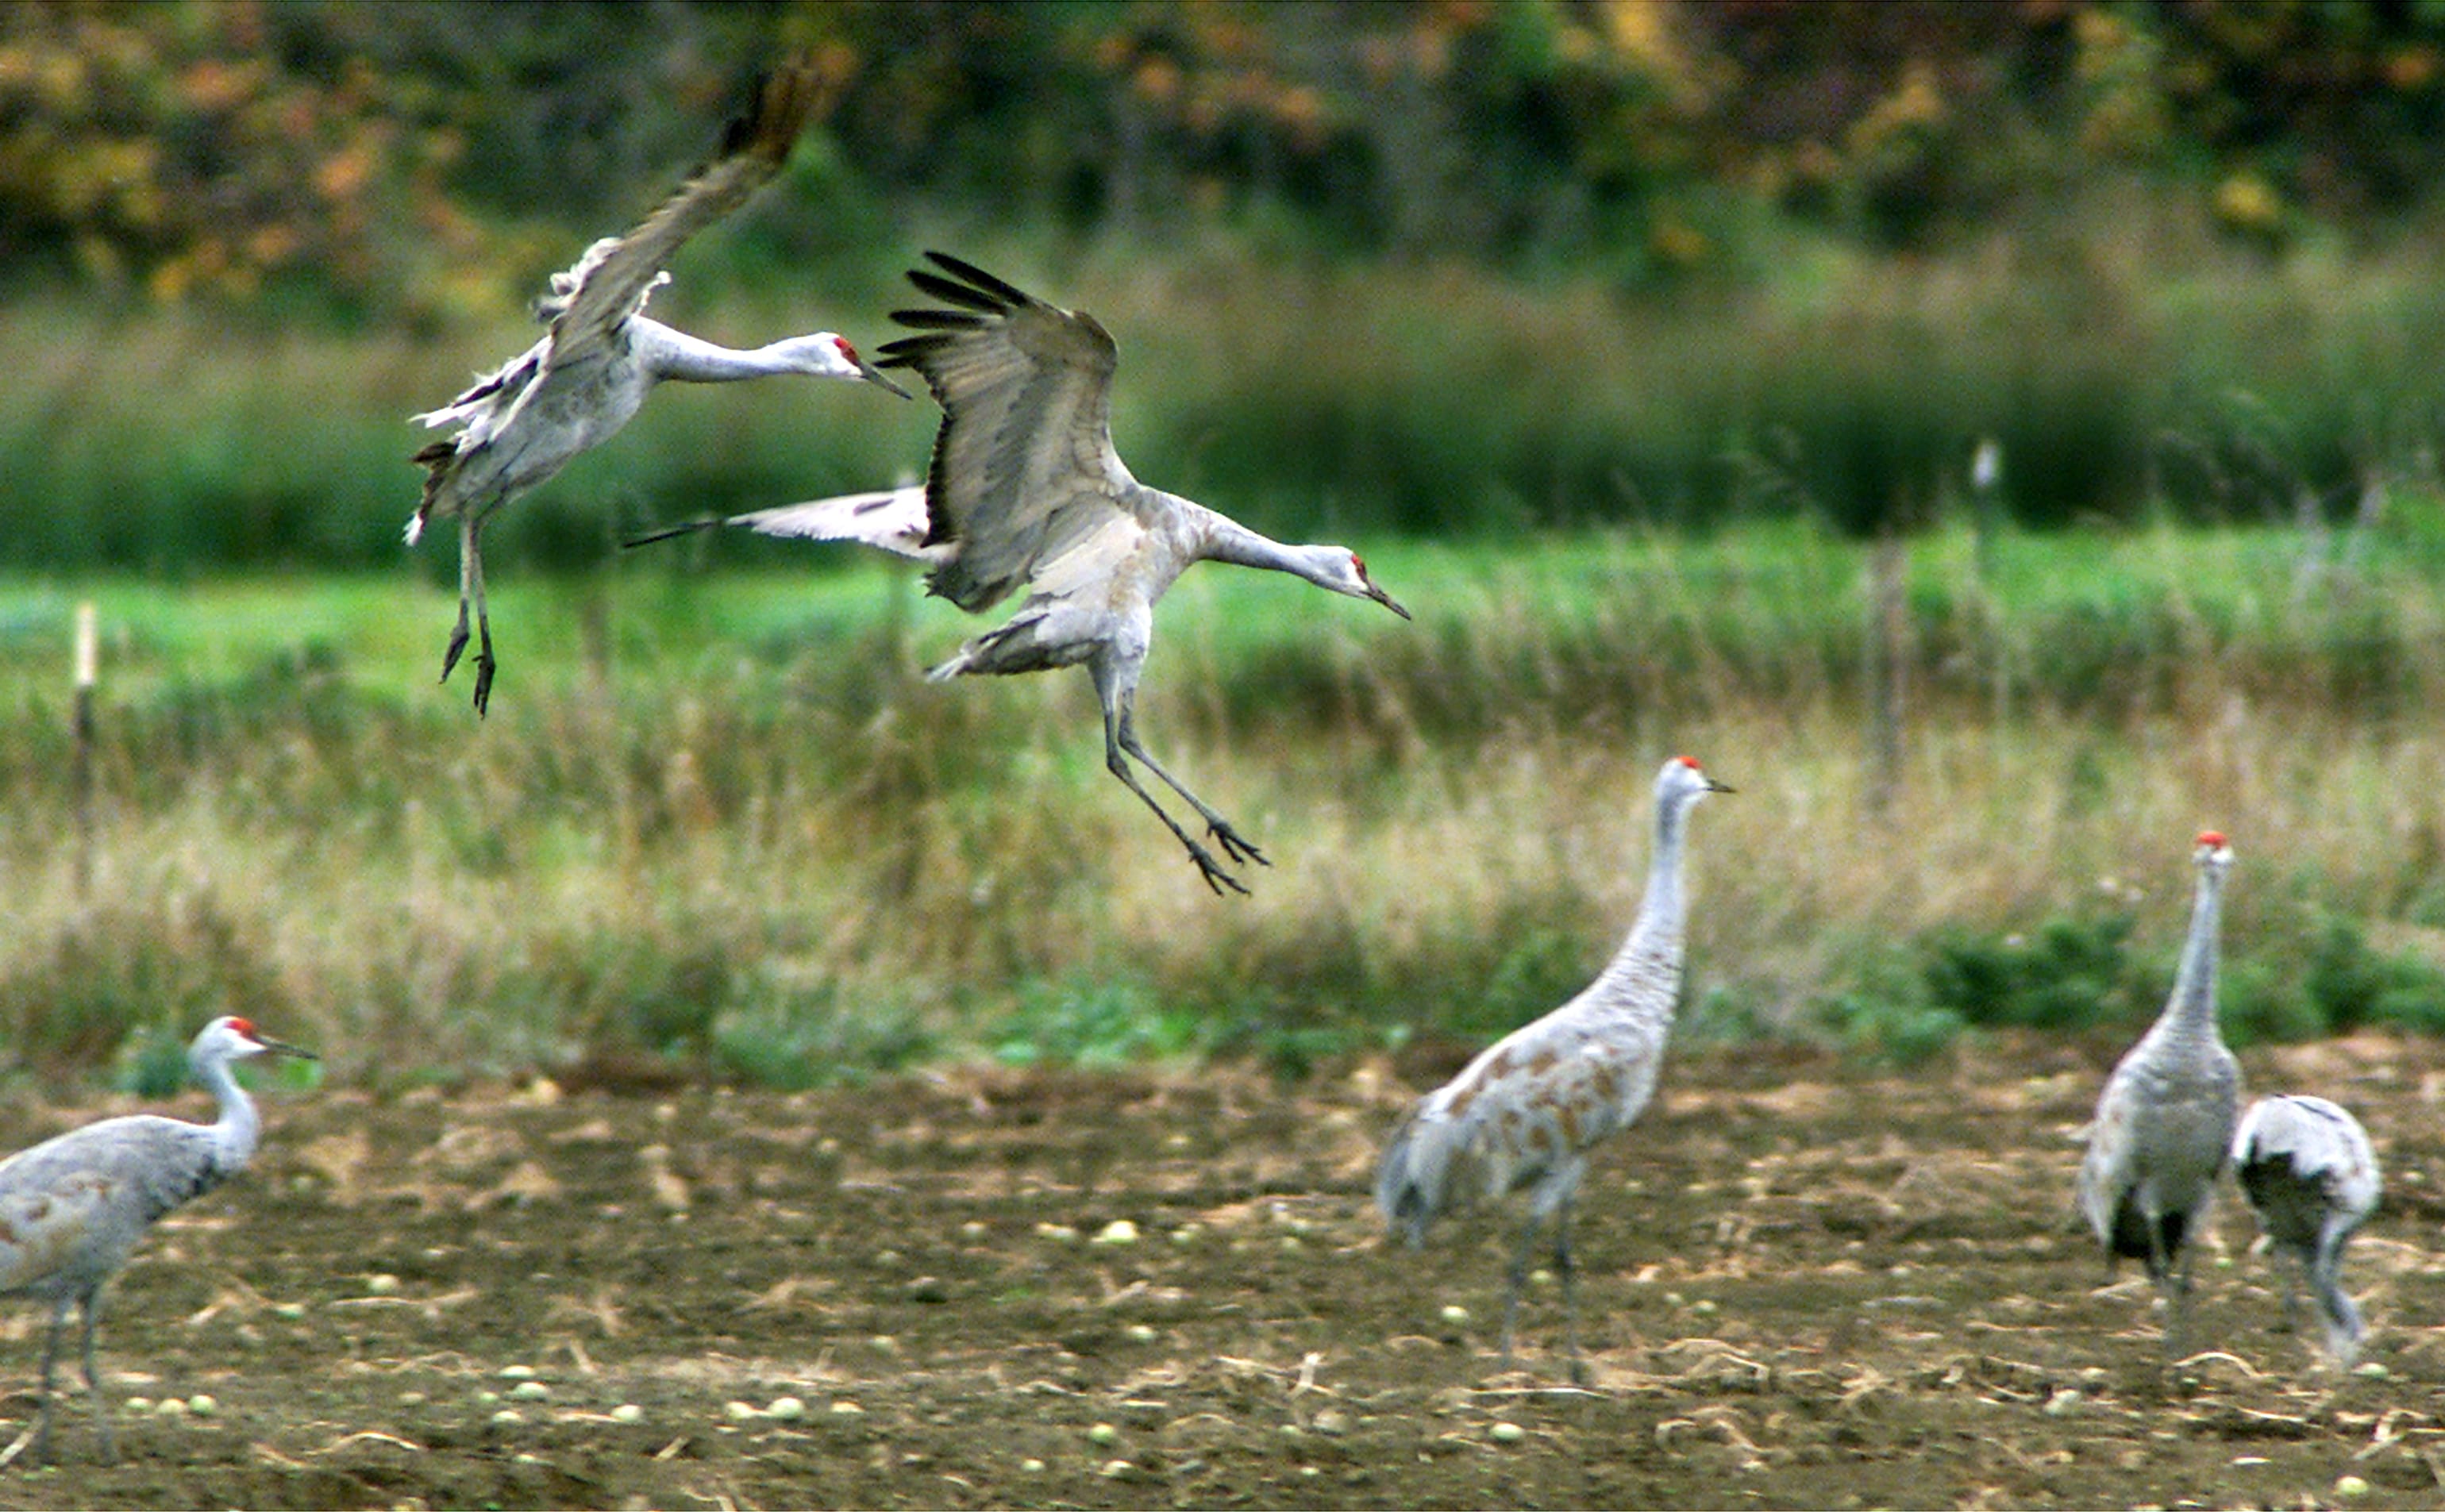 Two Sandhill cranes land in a field where other cranes are grazing near Lower River Road in 2003.